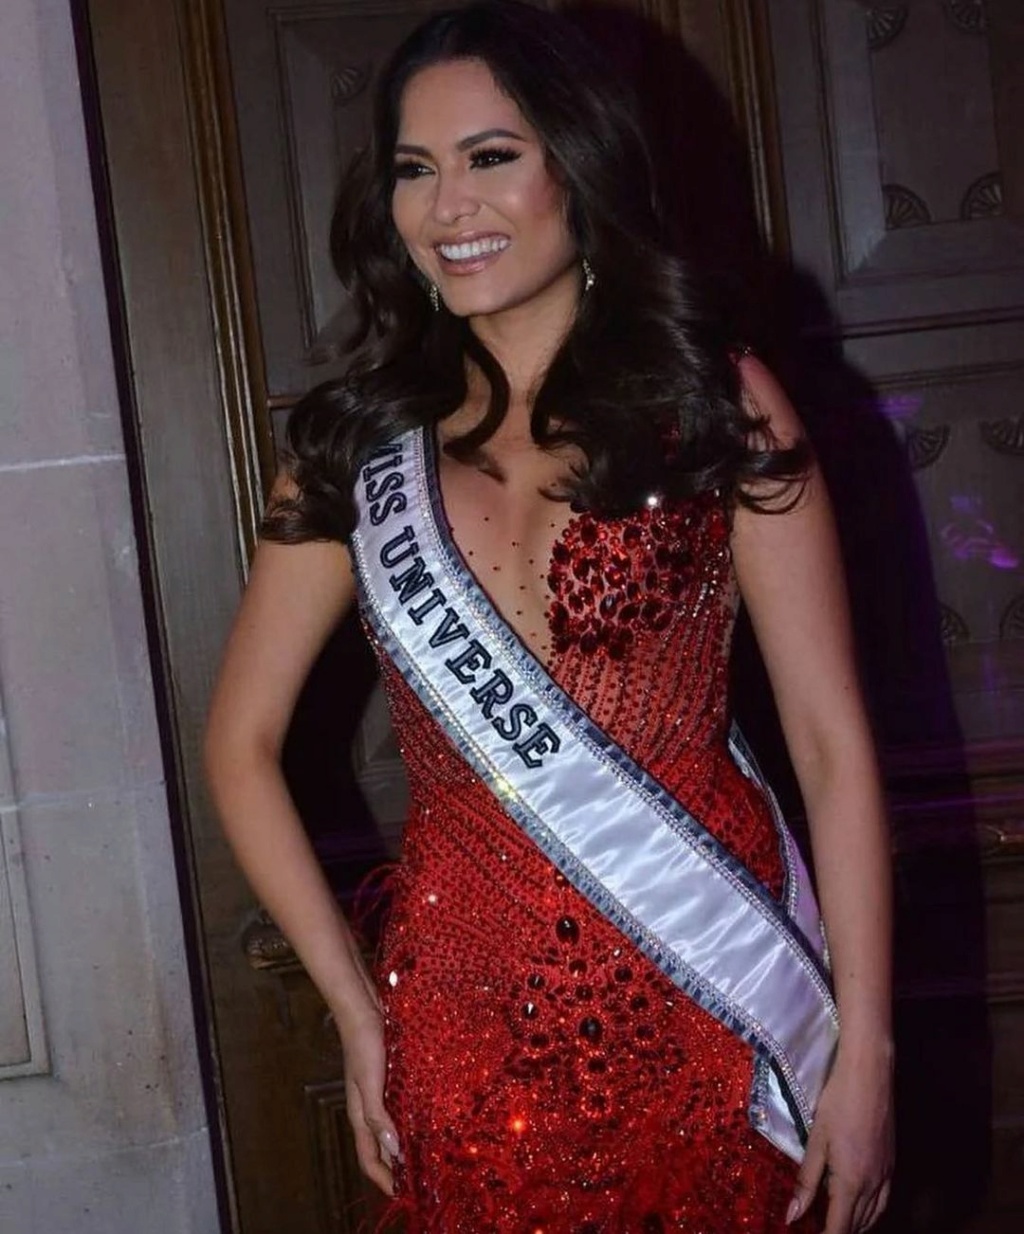 The Official Thread Of Miss Universe 2020 - Andrea Meza of Mexico  - Page 4 21363111